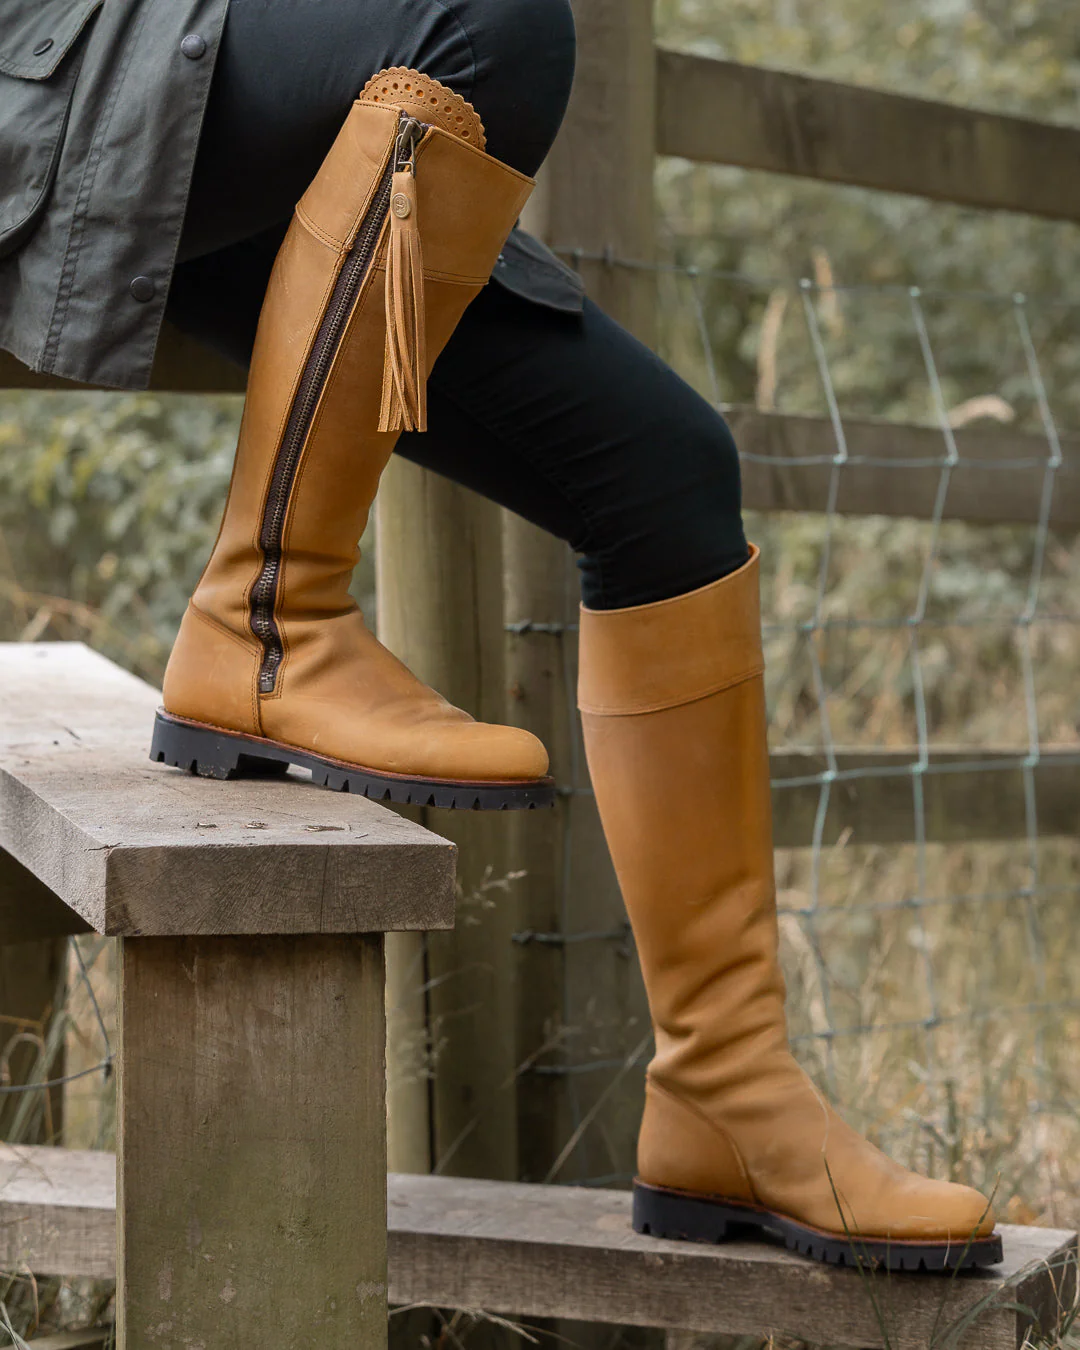 “Boot Shopping Made Easy: Finding the Right Fit and Style for You”